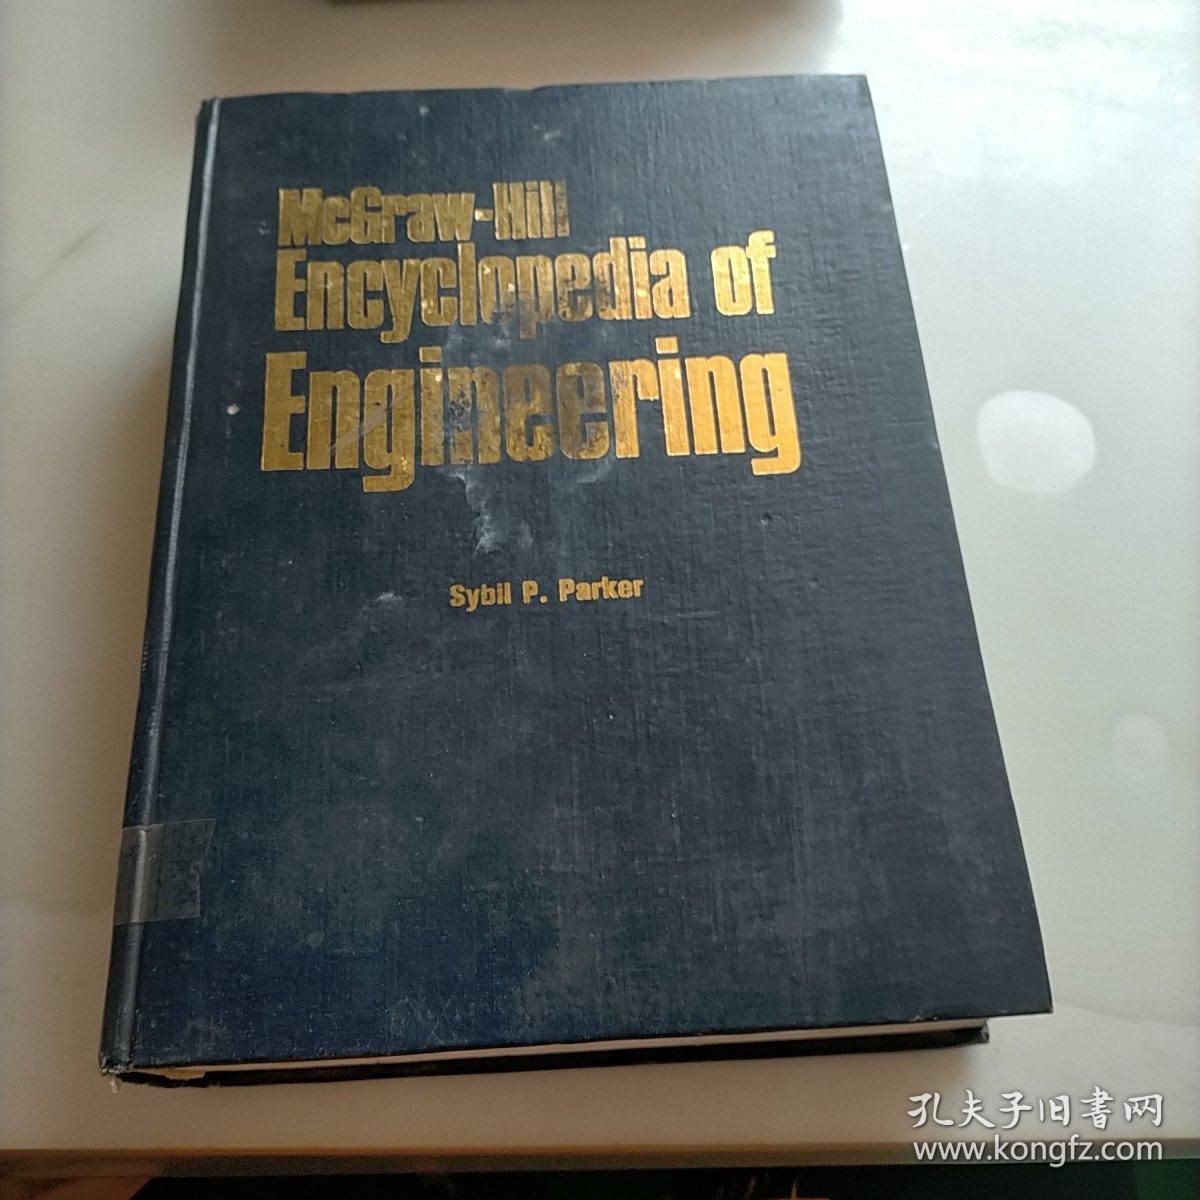 Mcgraw-Hill Encyclopedia of Engineering